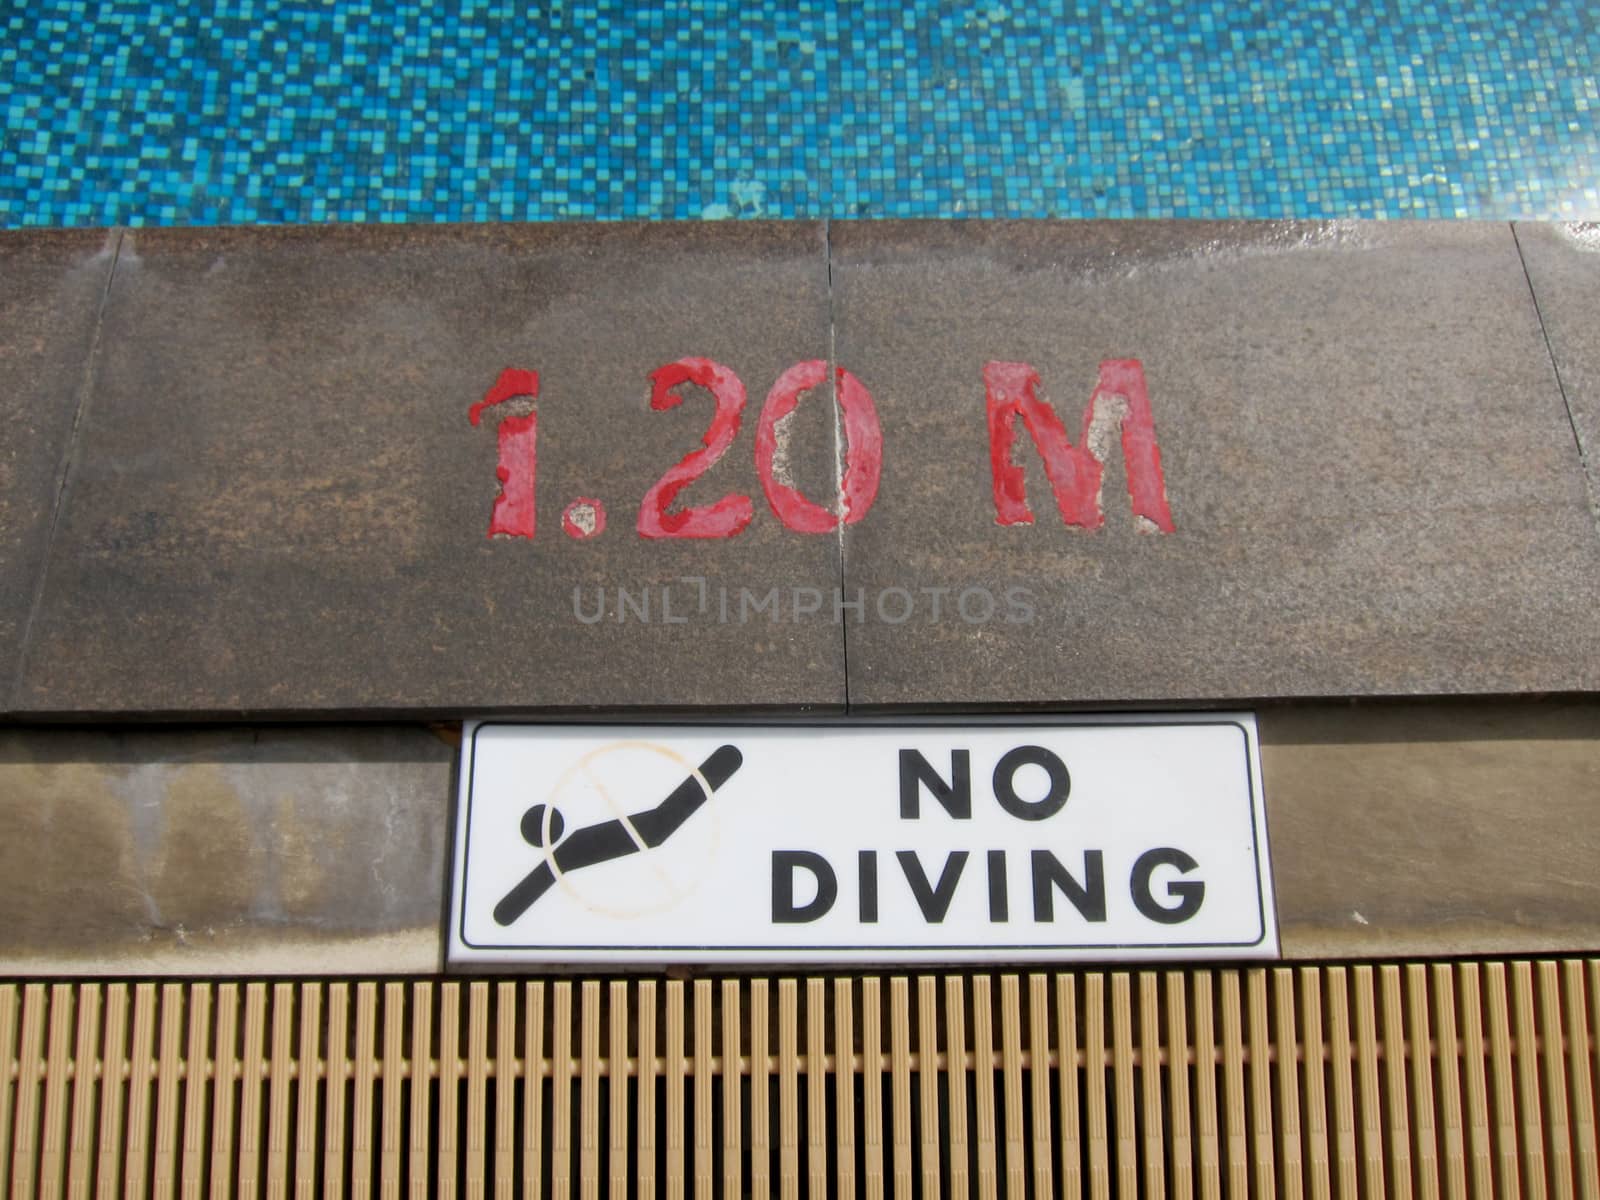 No diving sign and pool depth markings on swimming pool edge